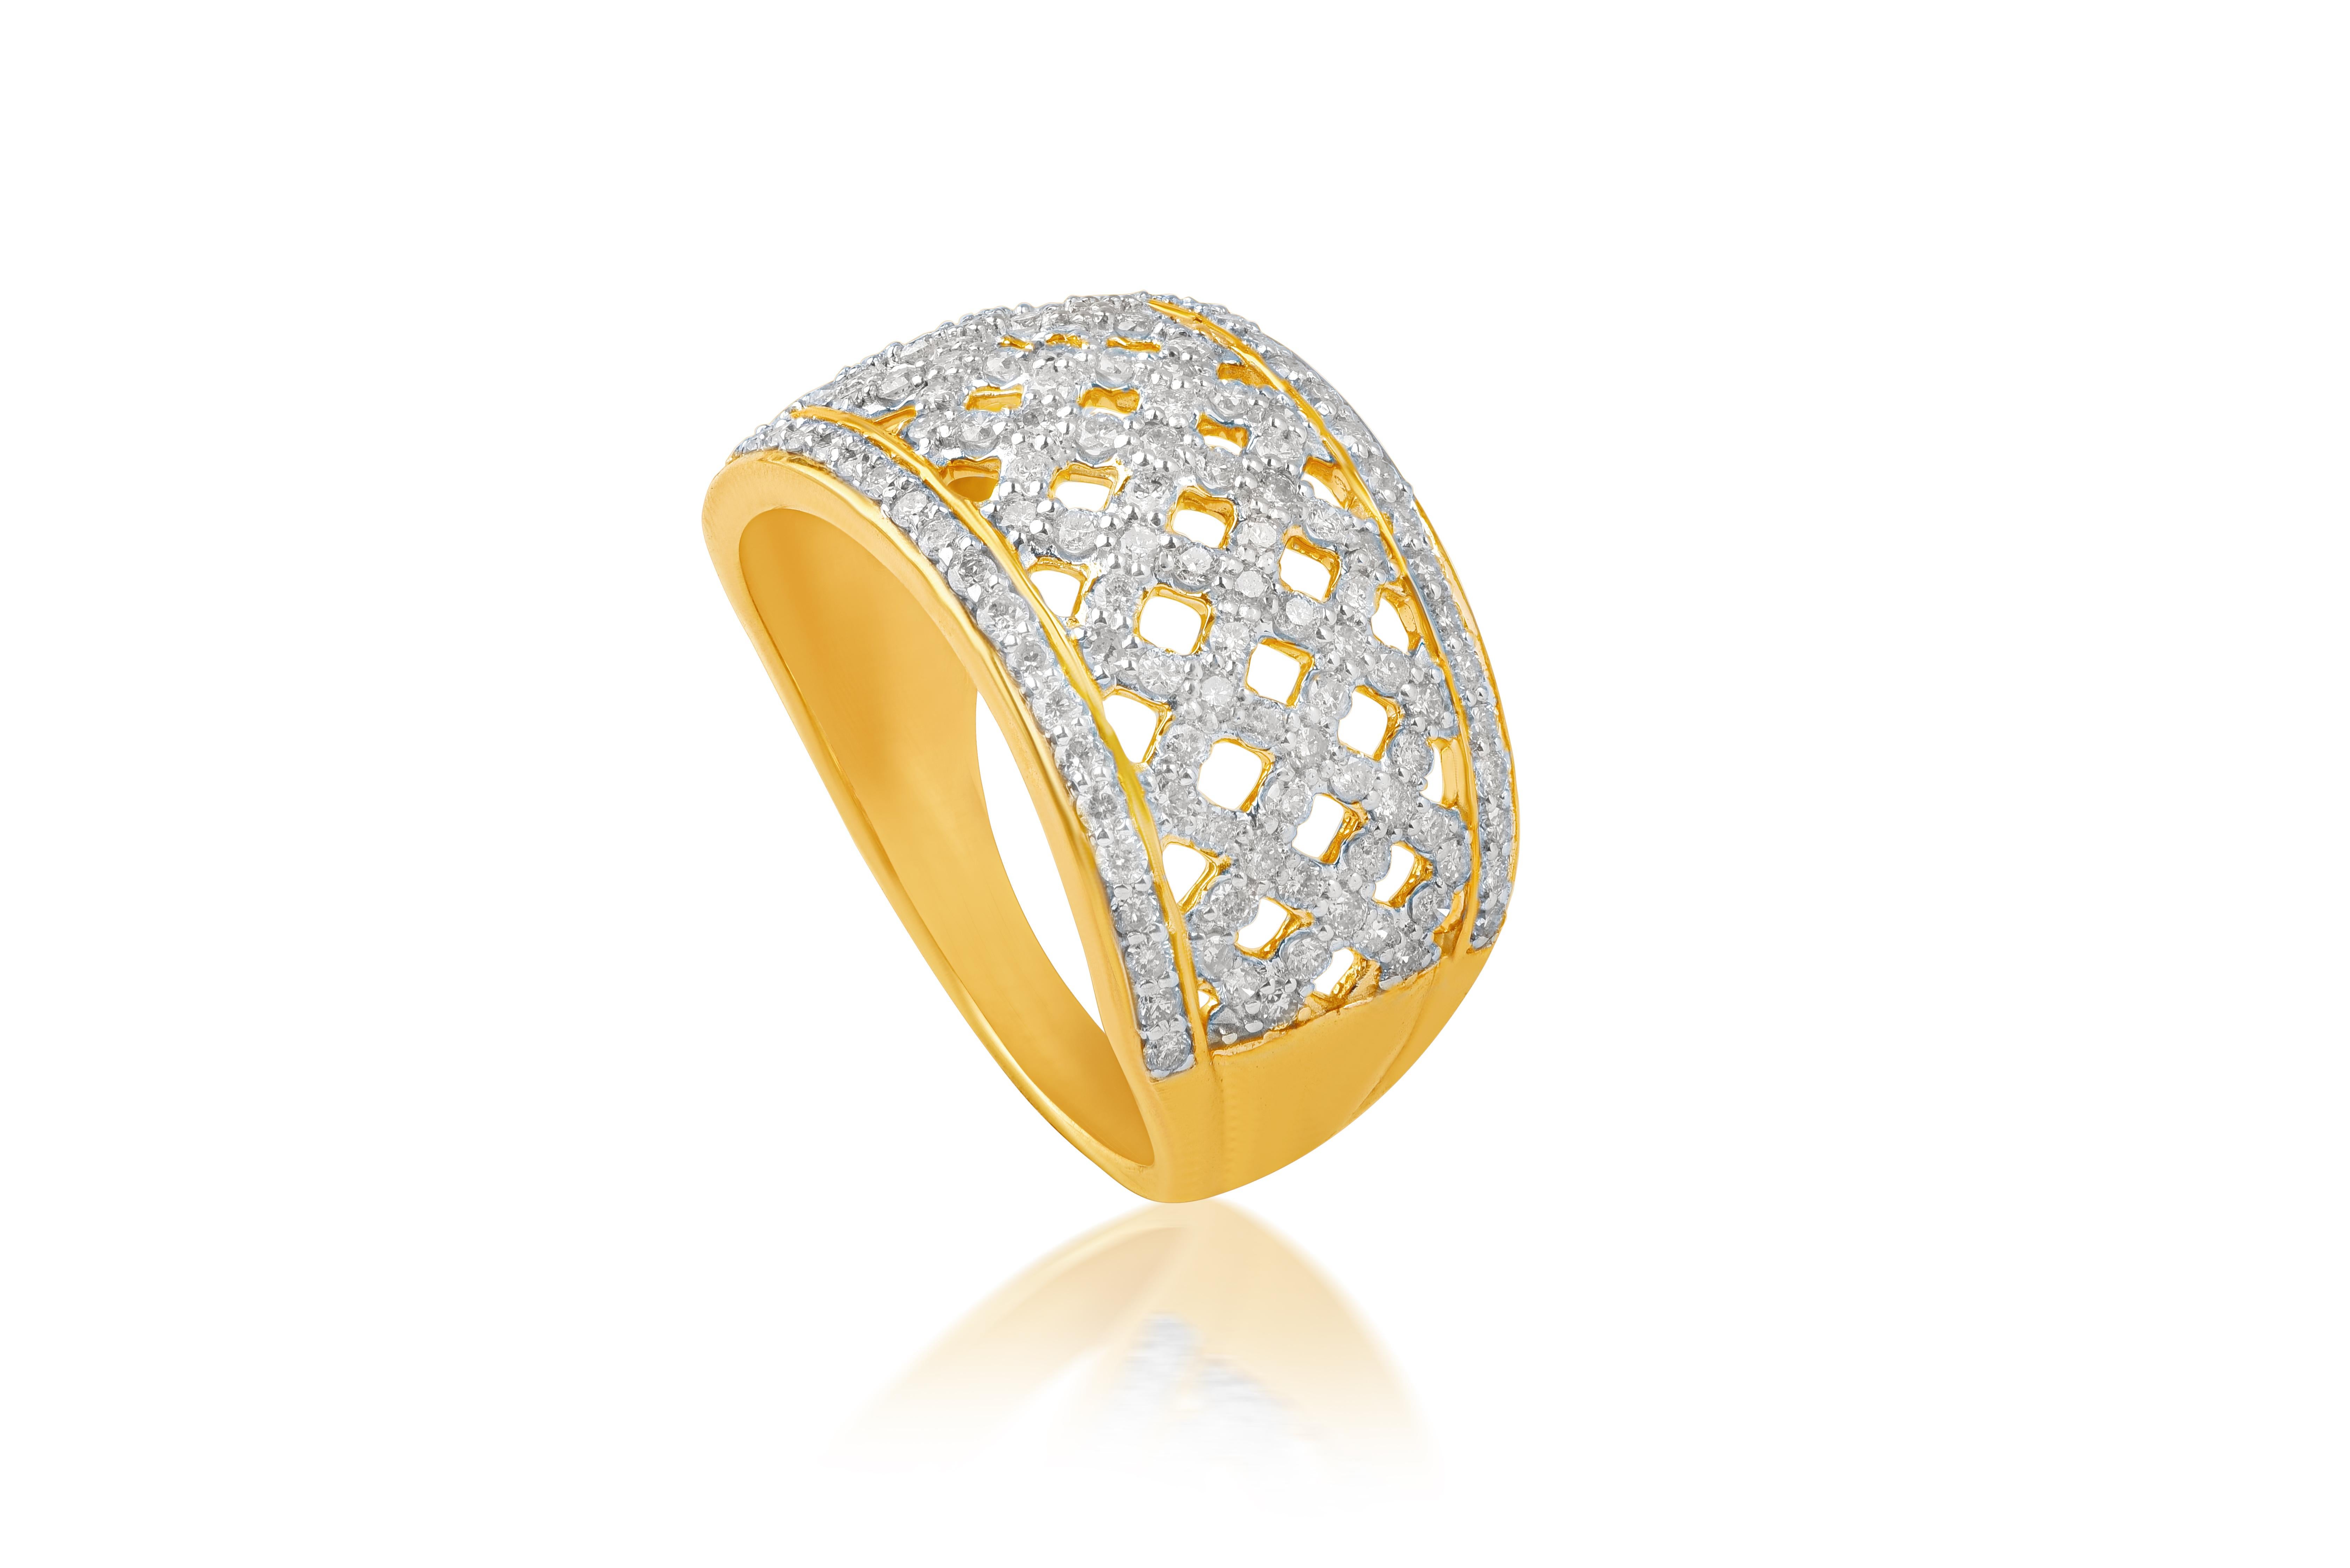 Simple yet elegantly crafted diamond designer ring, exquisitely designed and crafted in 10 kt yellow gold. This shimmering design features 137 round natural diamonds set in prong setting, diamonds are graded I-J Color, I3 Clarity. Ring size is US